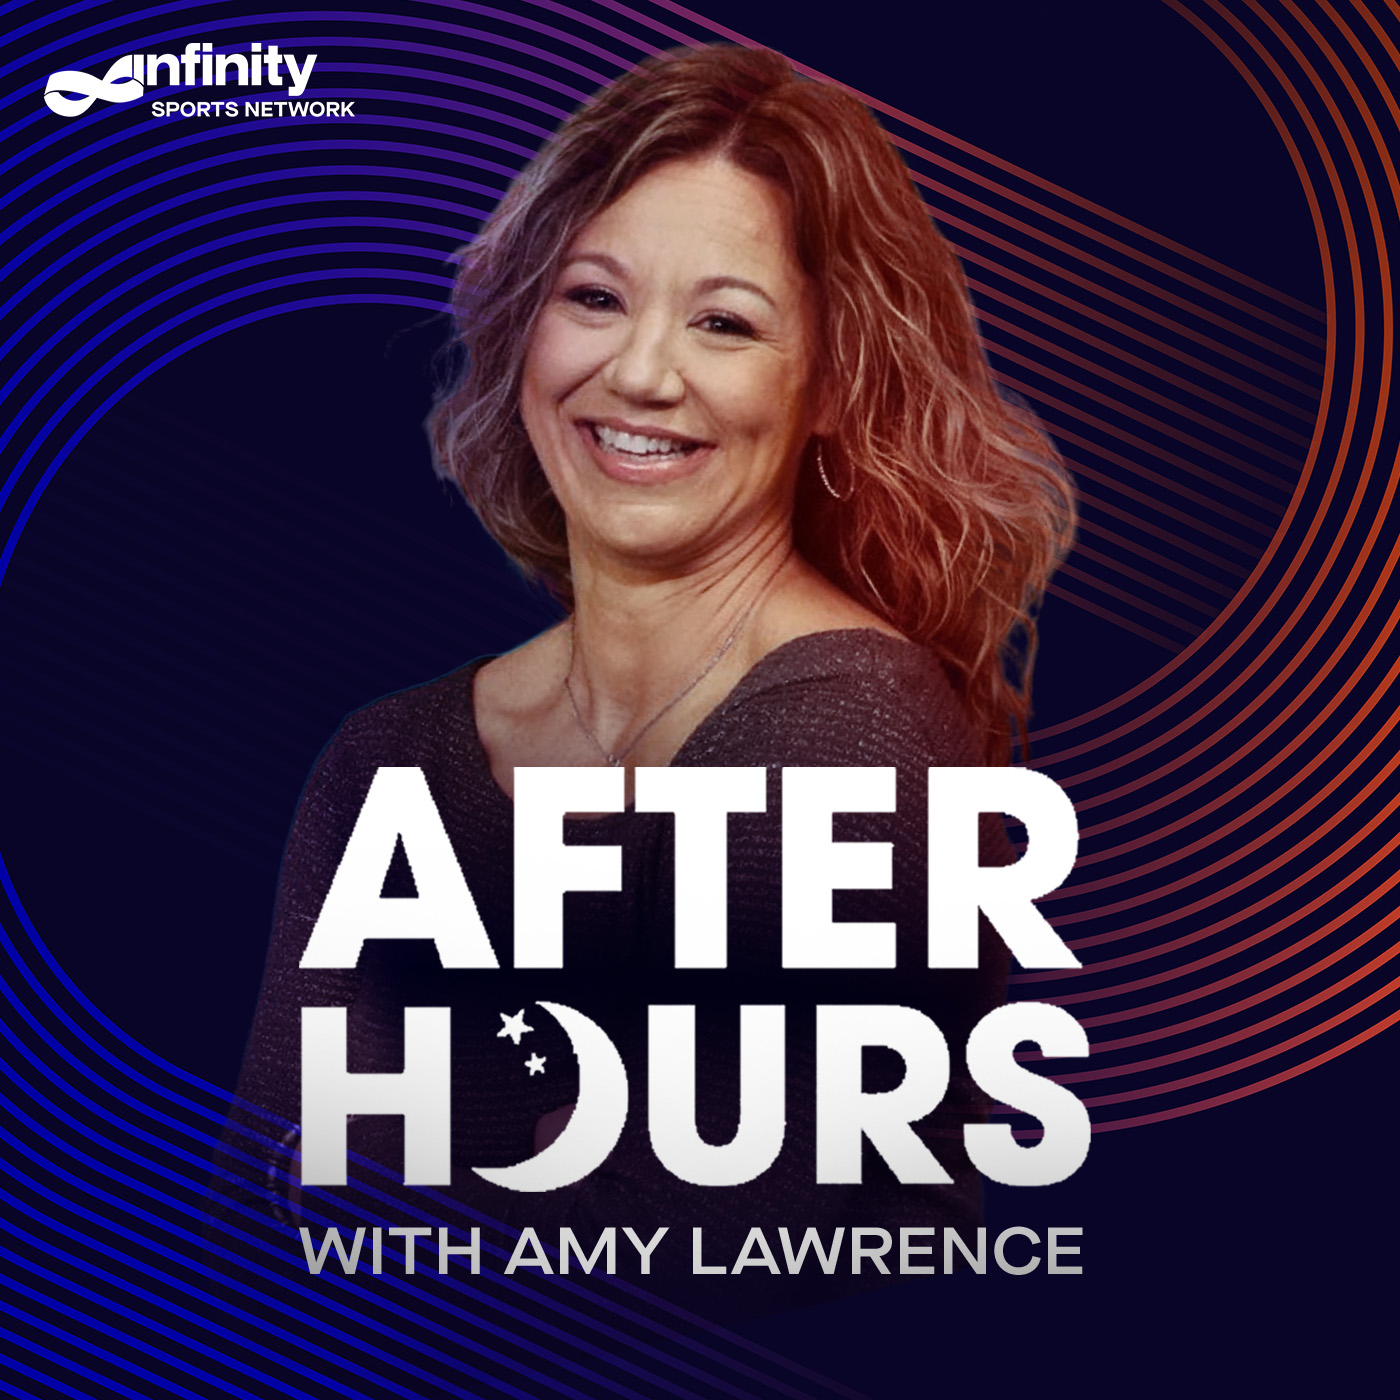 1-10-22 After Hours with Amy Lawrence PODCAST: Hour 1